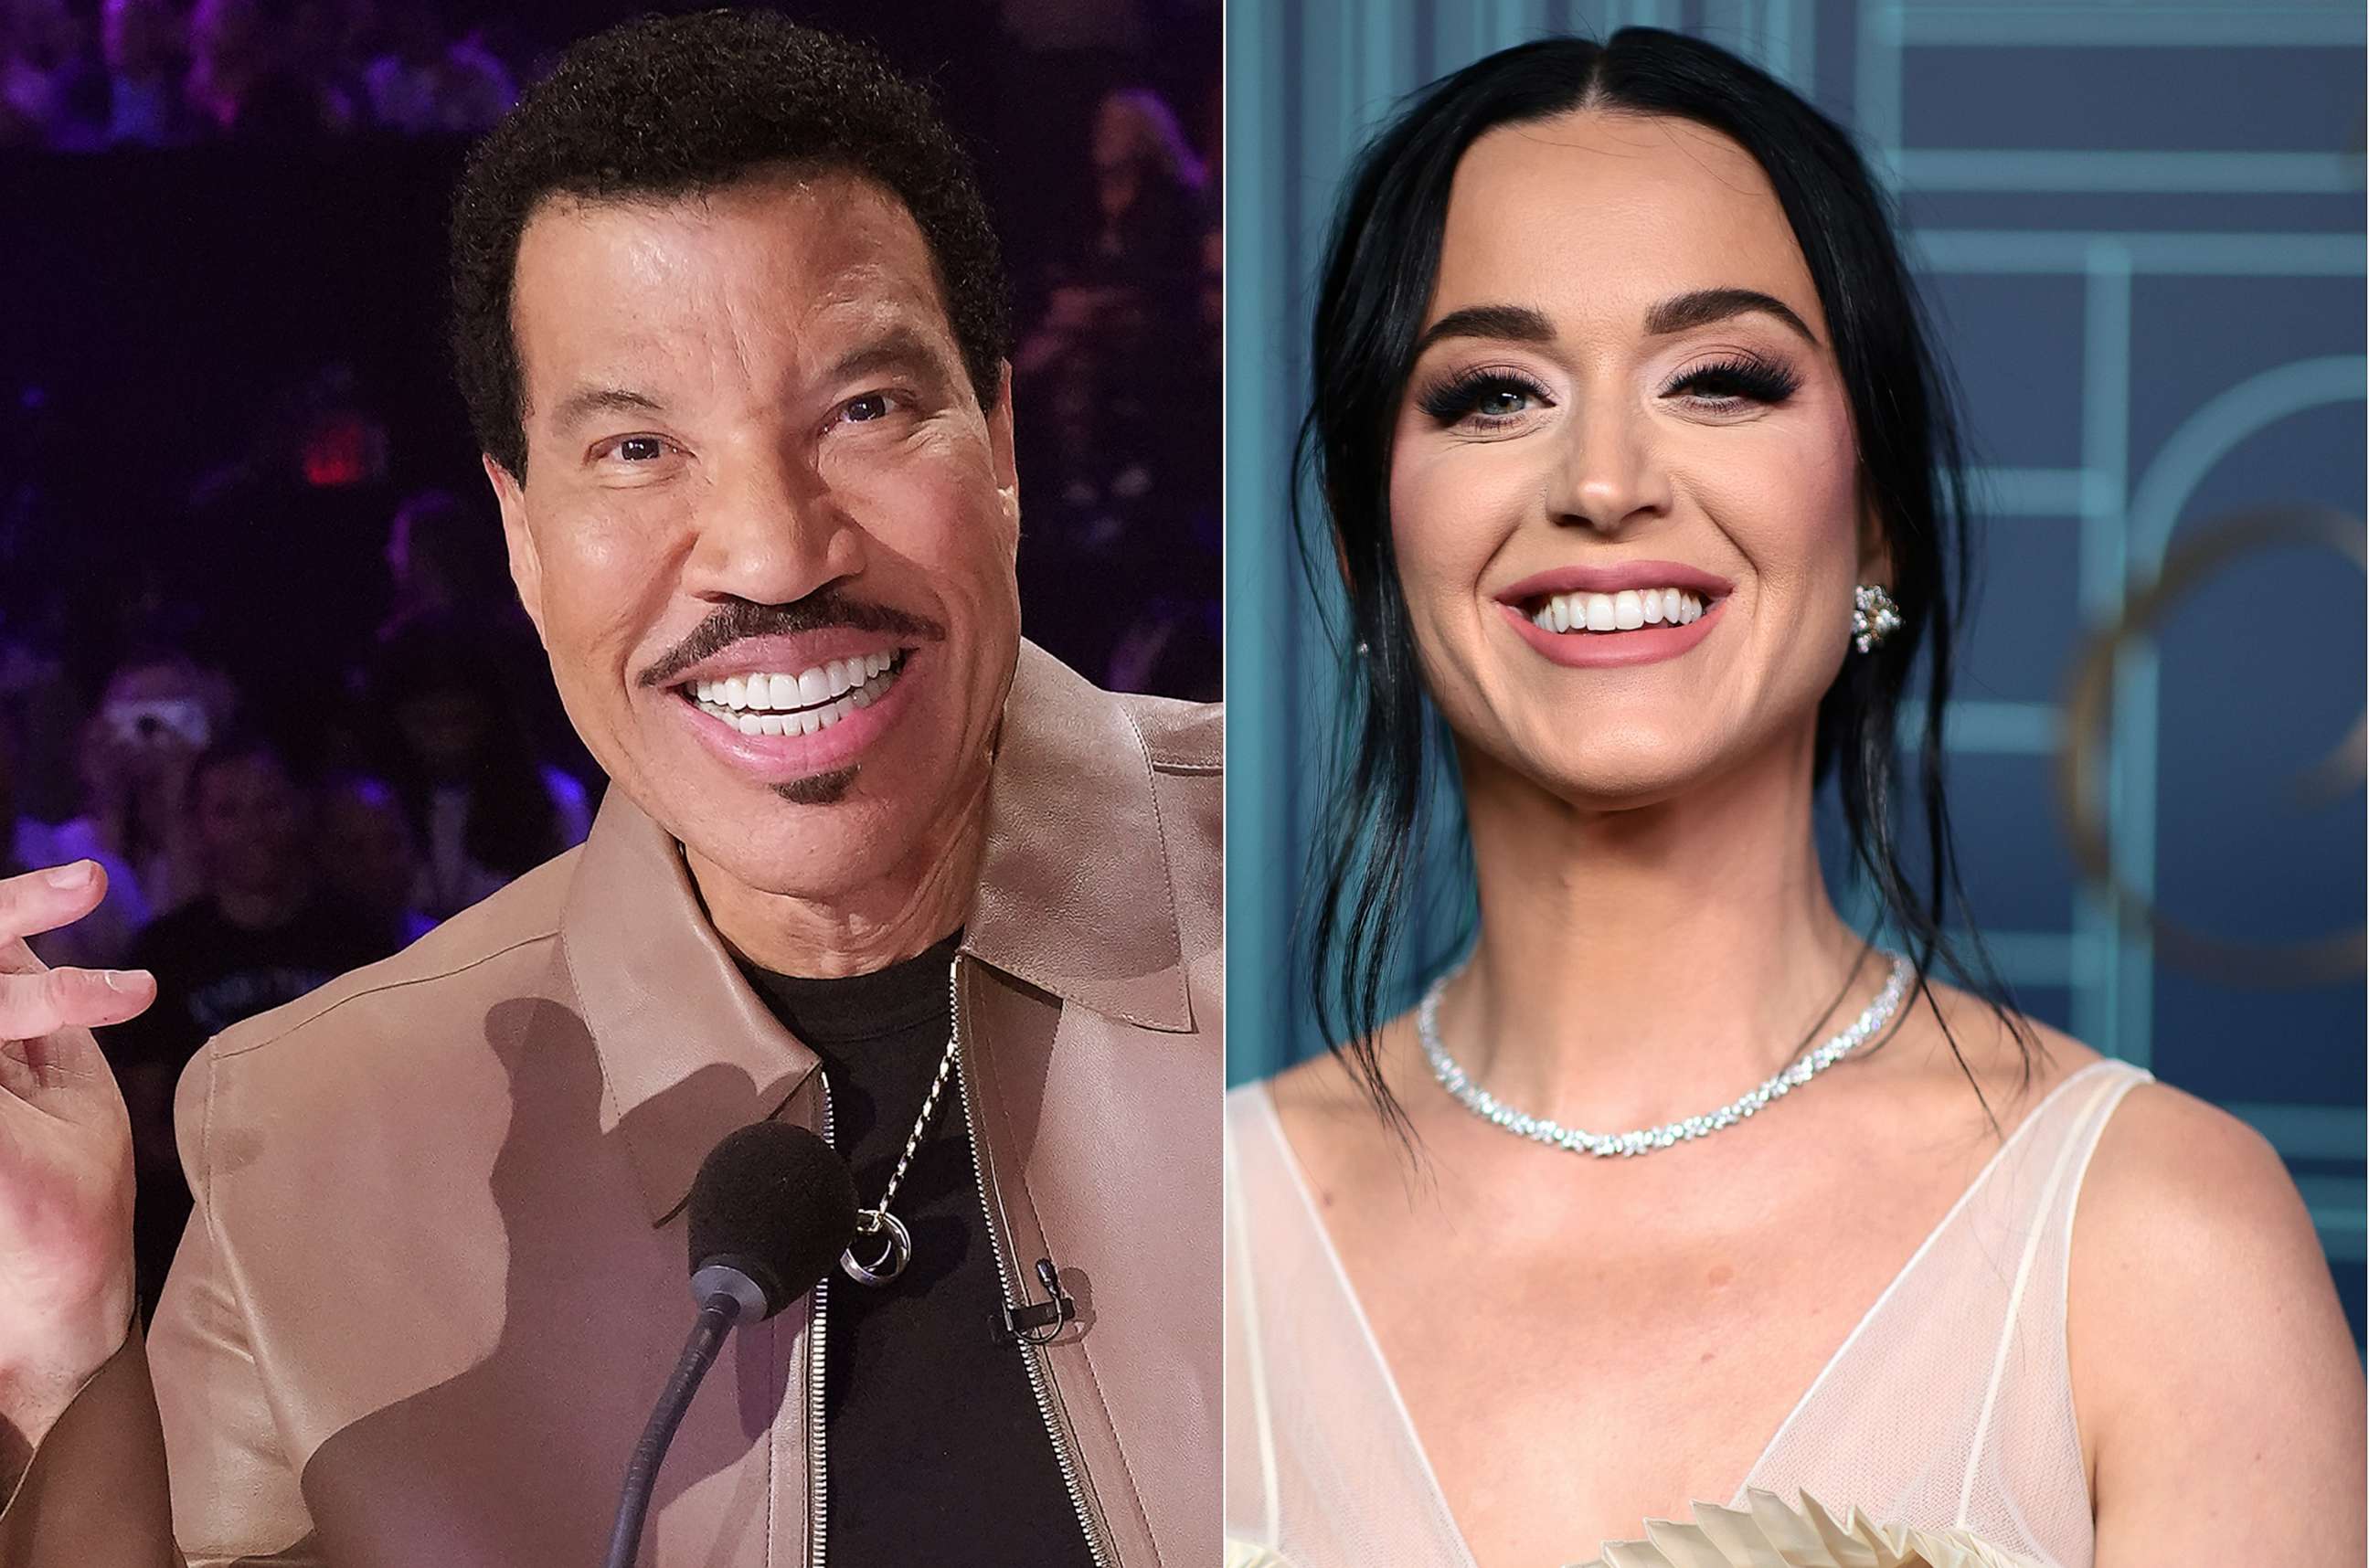 PHOTO: Lionel Ritchie and Katy Perry.